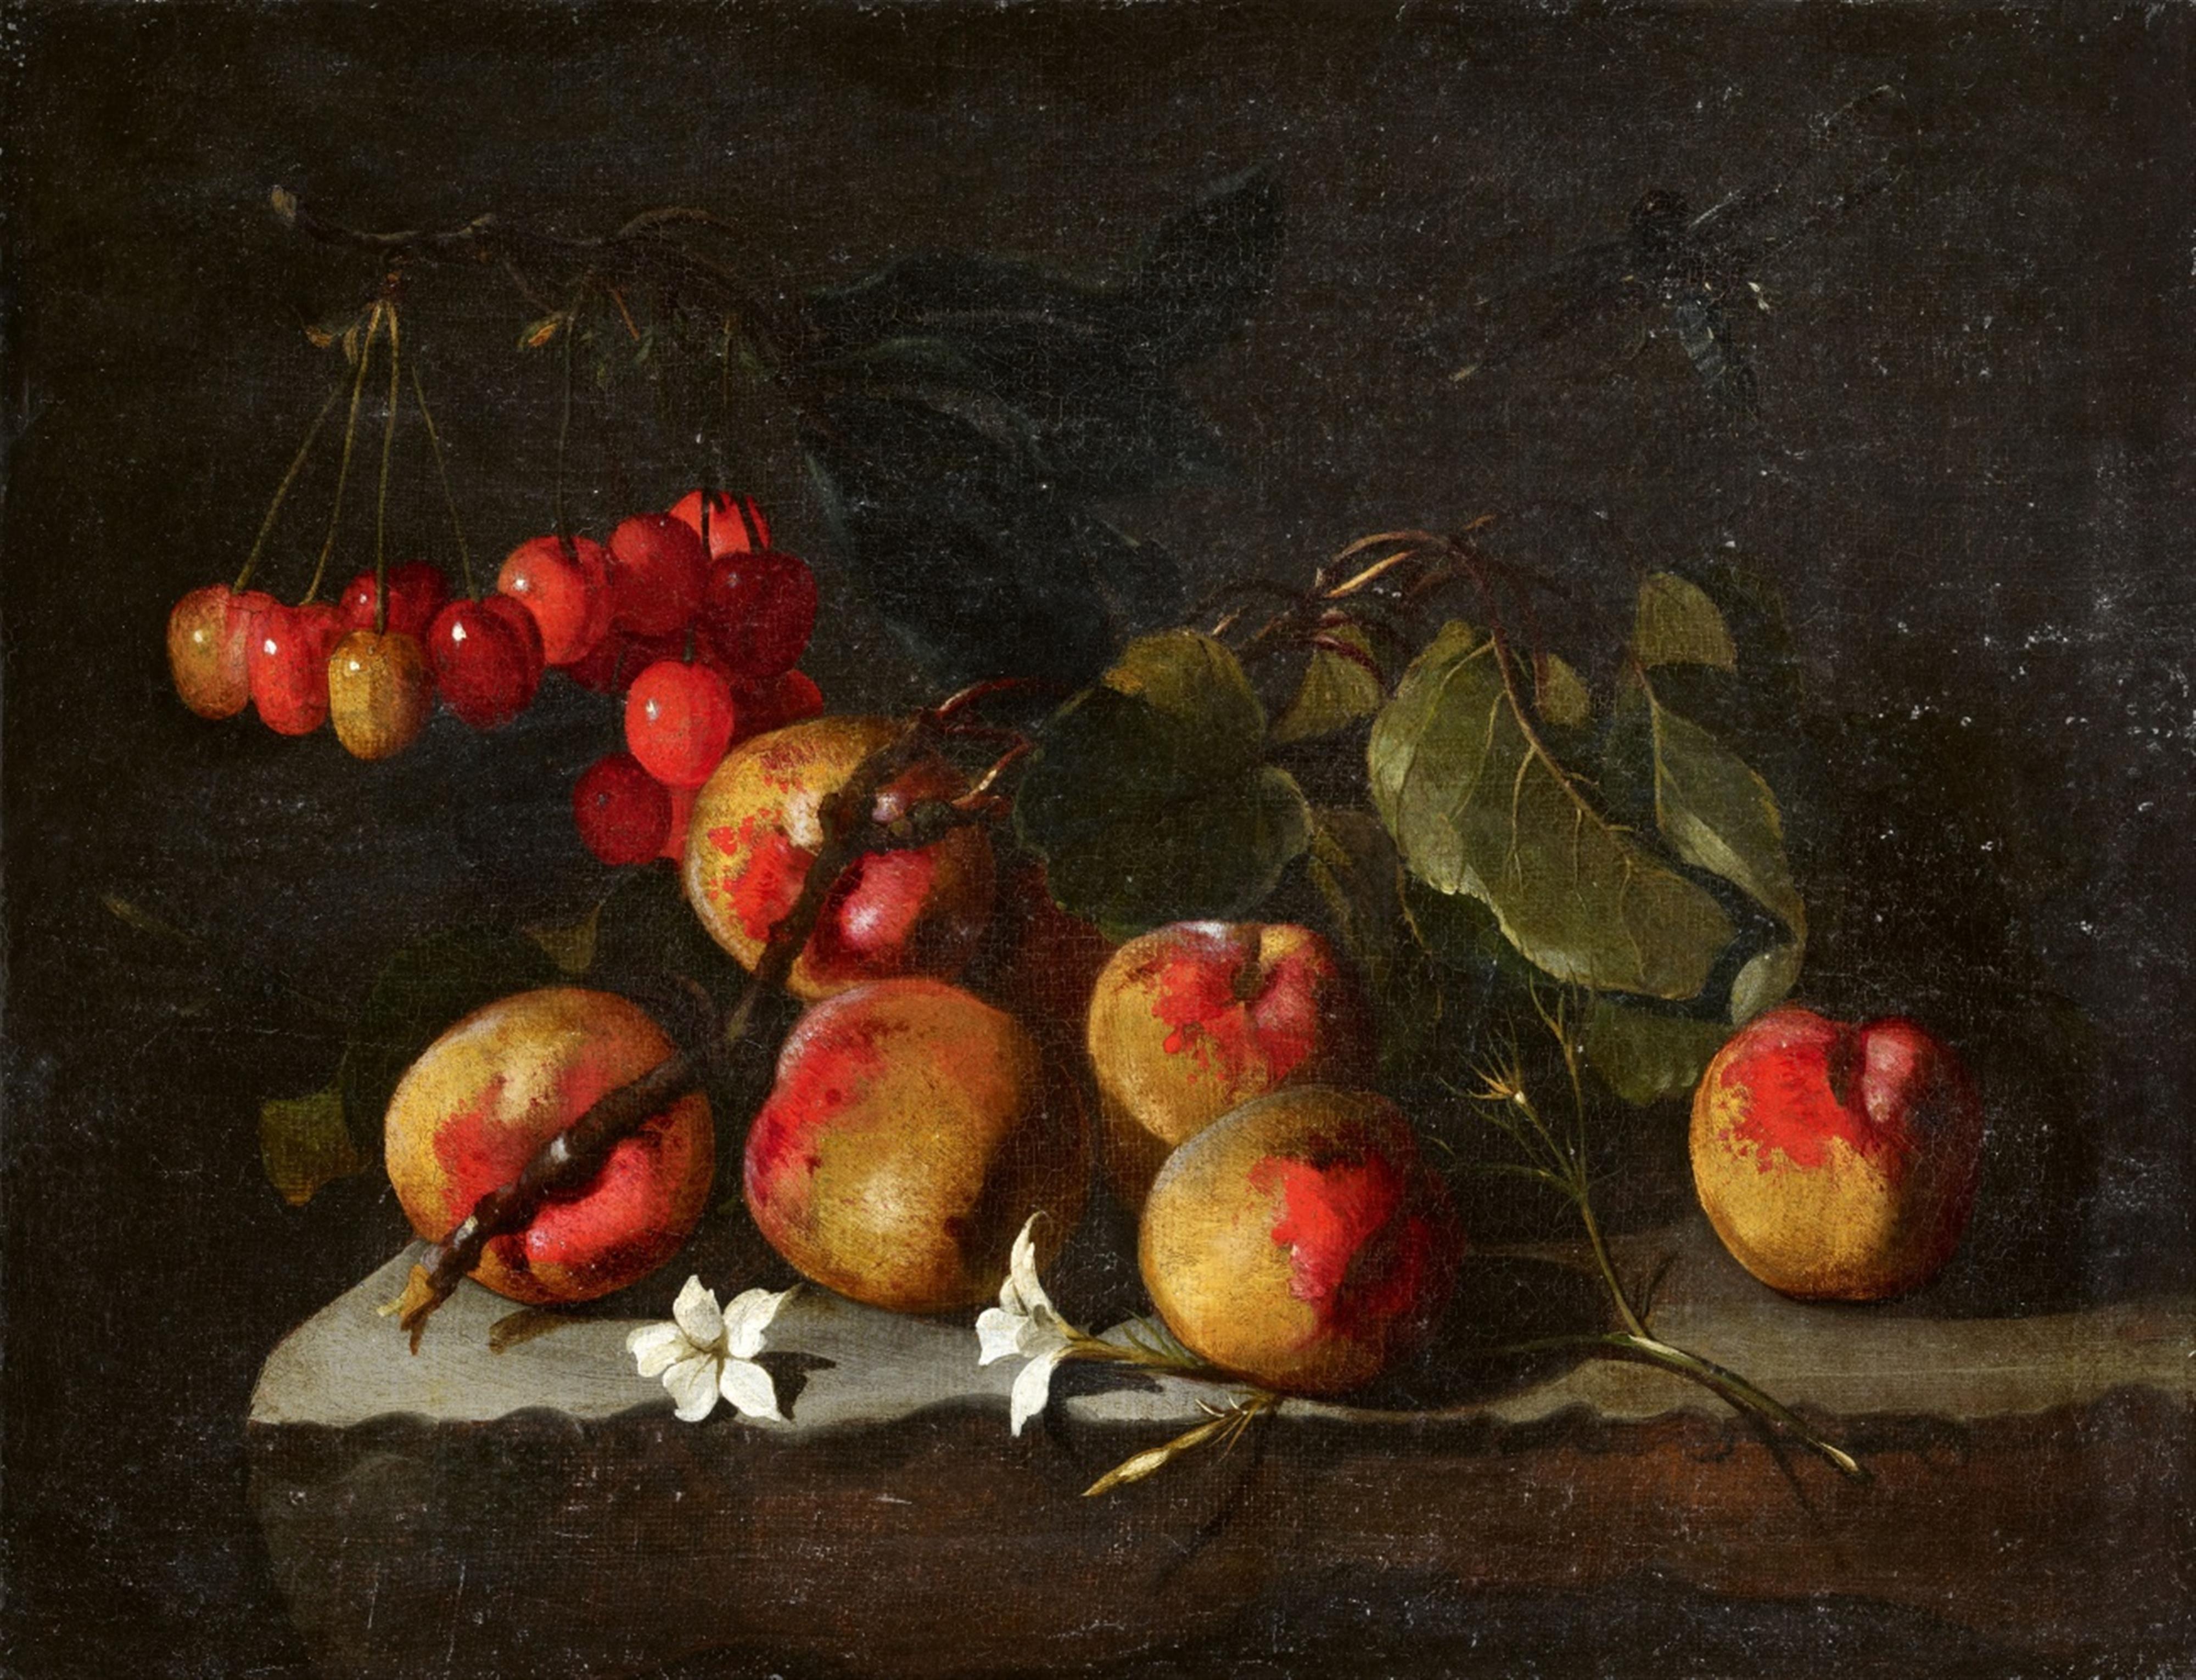 Paolo Porpora - Still Life with Peaches, Cherries, and Jasmine Flowers - image-1